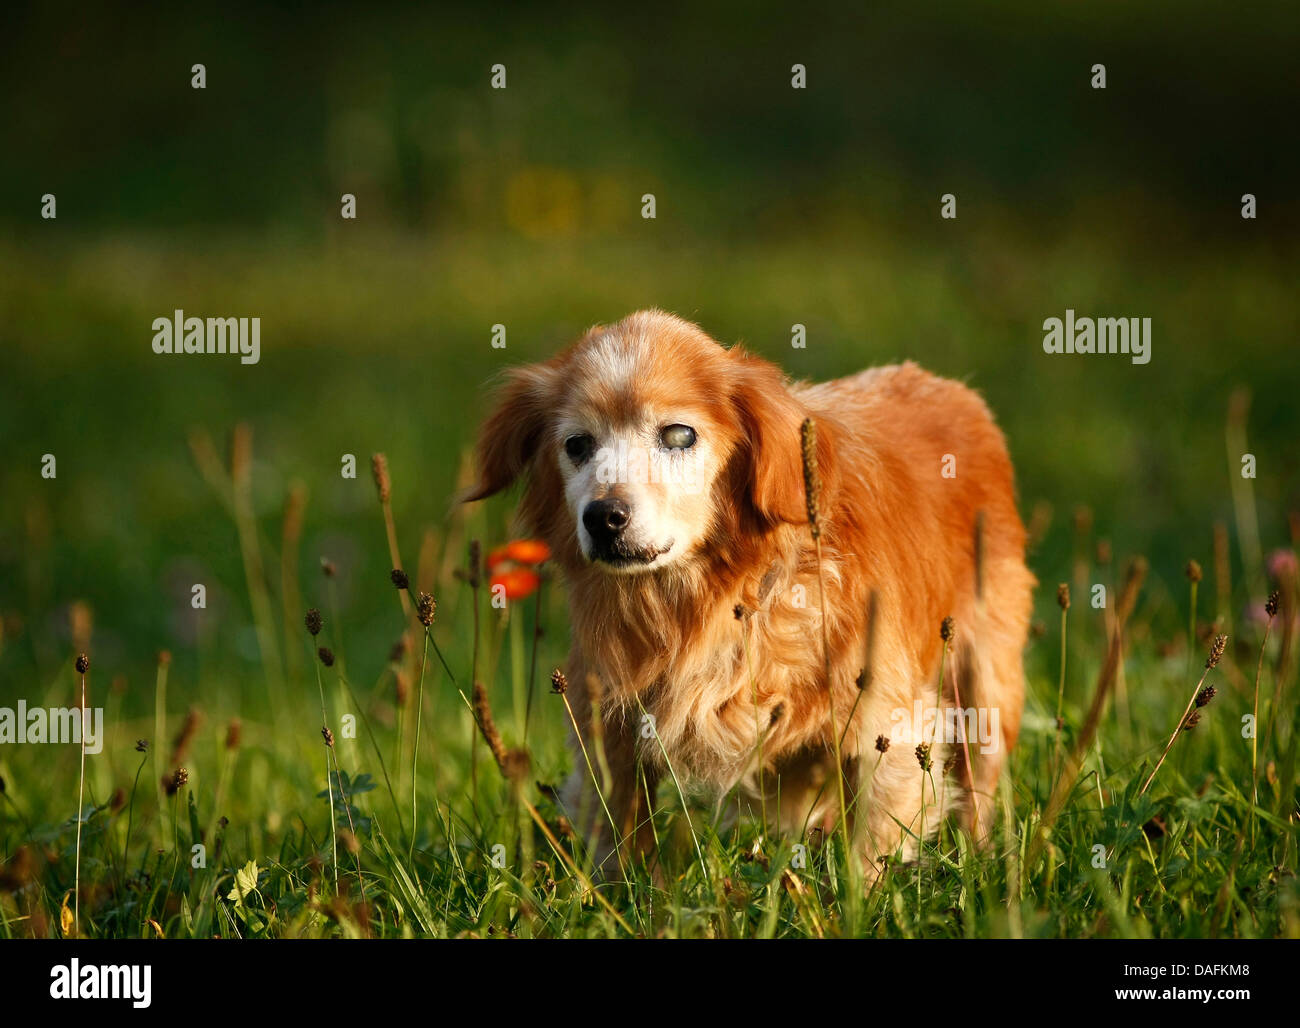 Long-haired Dachshund, Long-haired sausage dog, domestic dog (Canis lupus f. familiaris), 21 years old gone blind Dachshund standing in a meadow, Germany Stock Photo